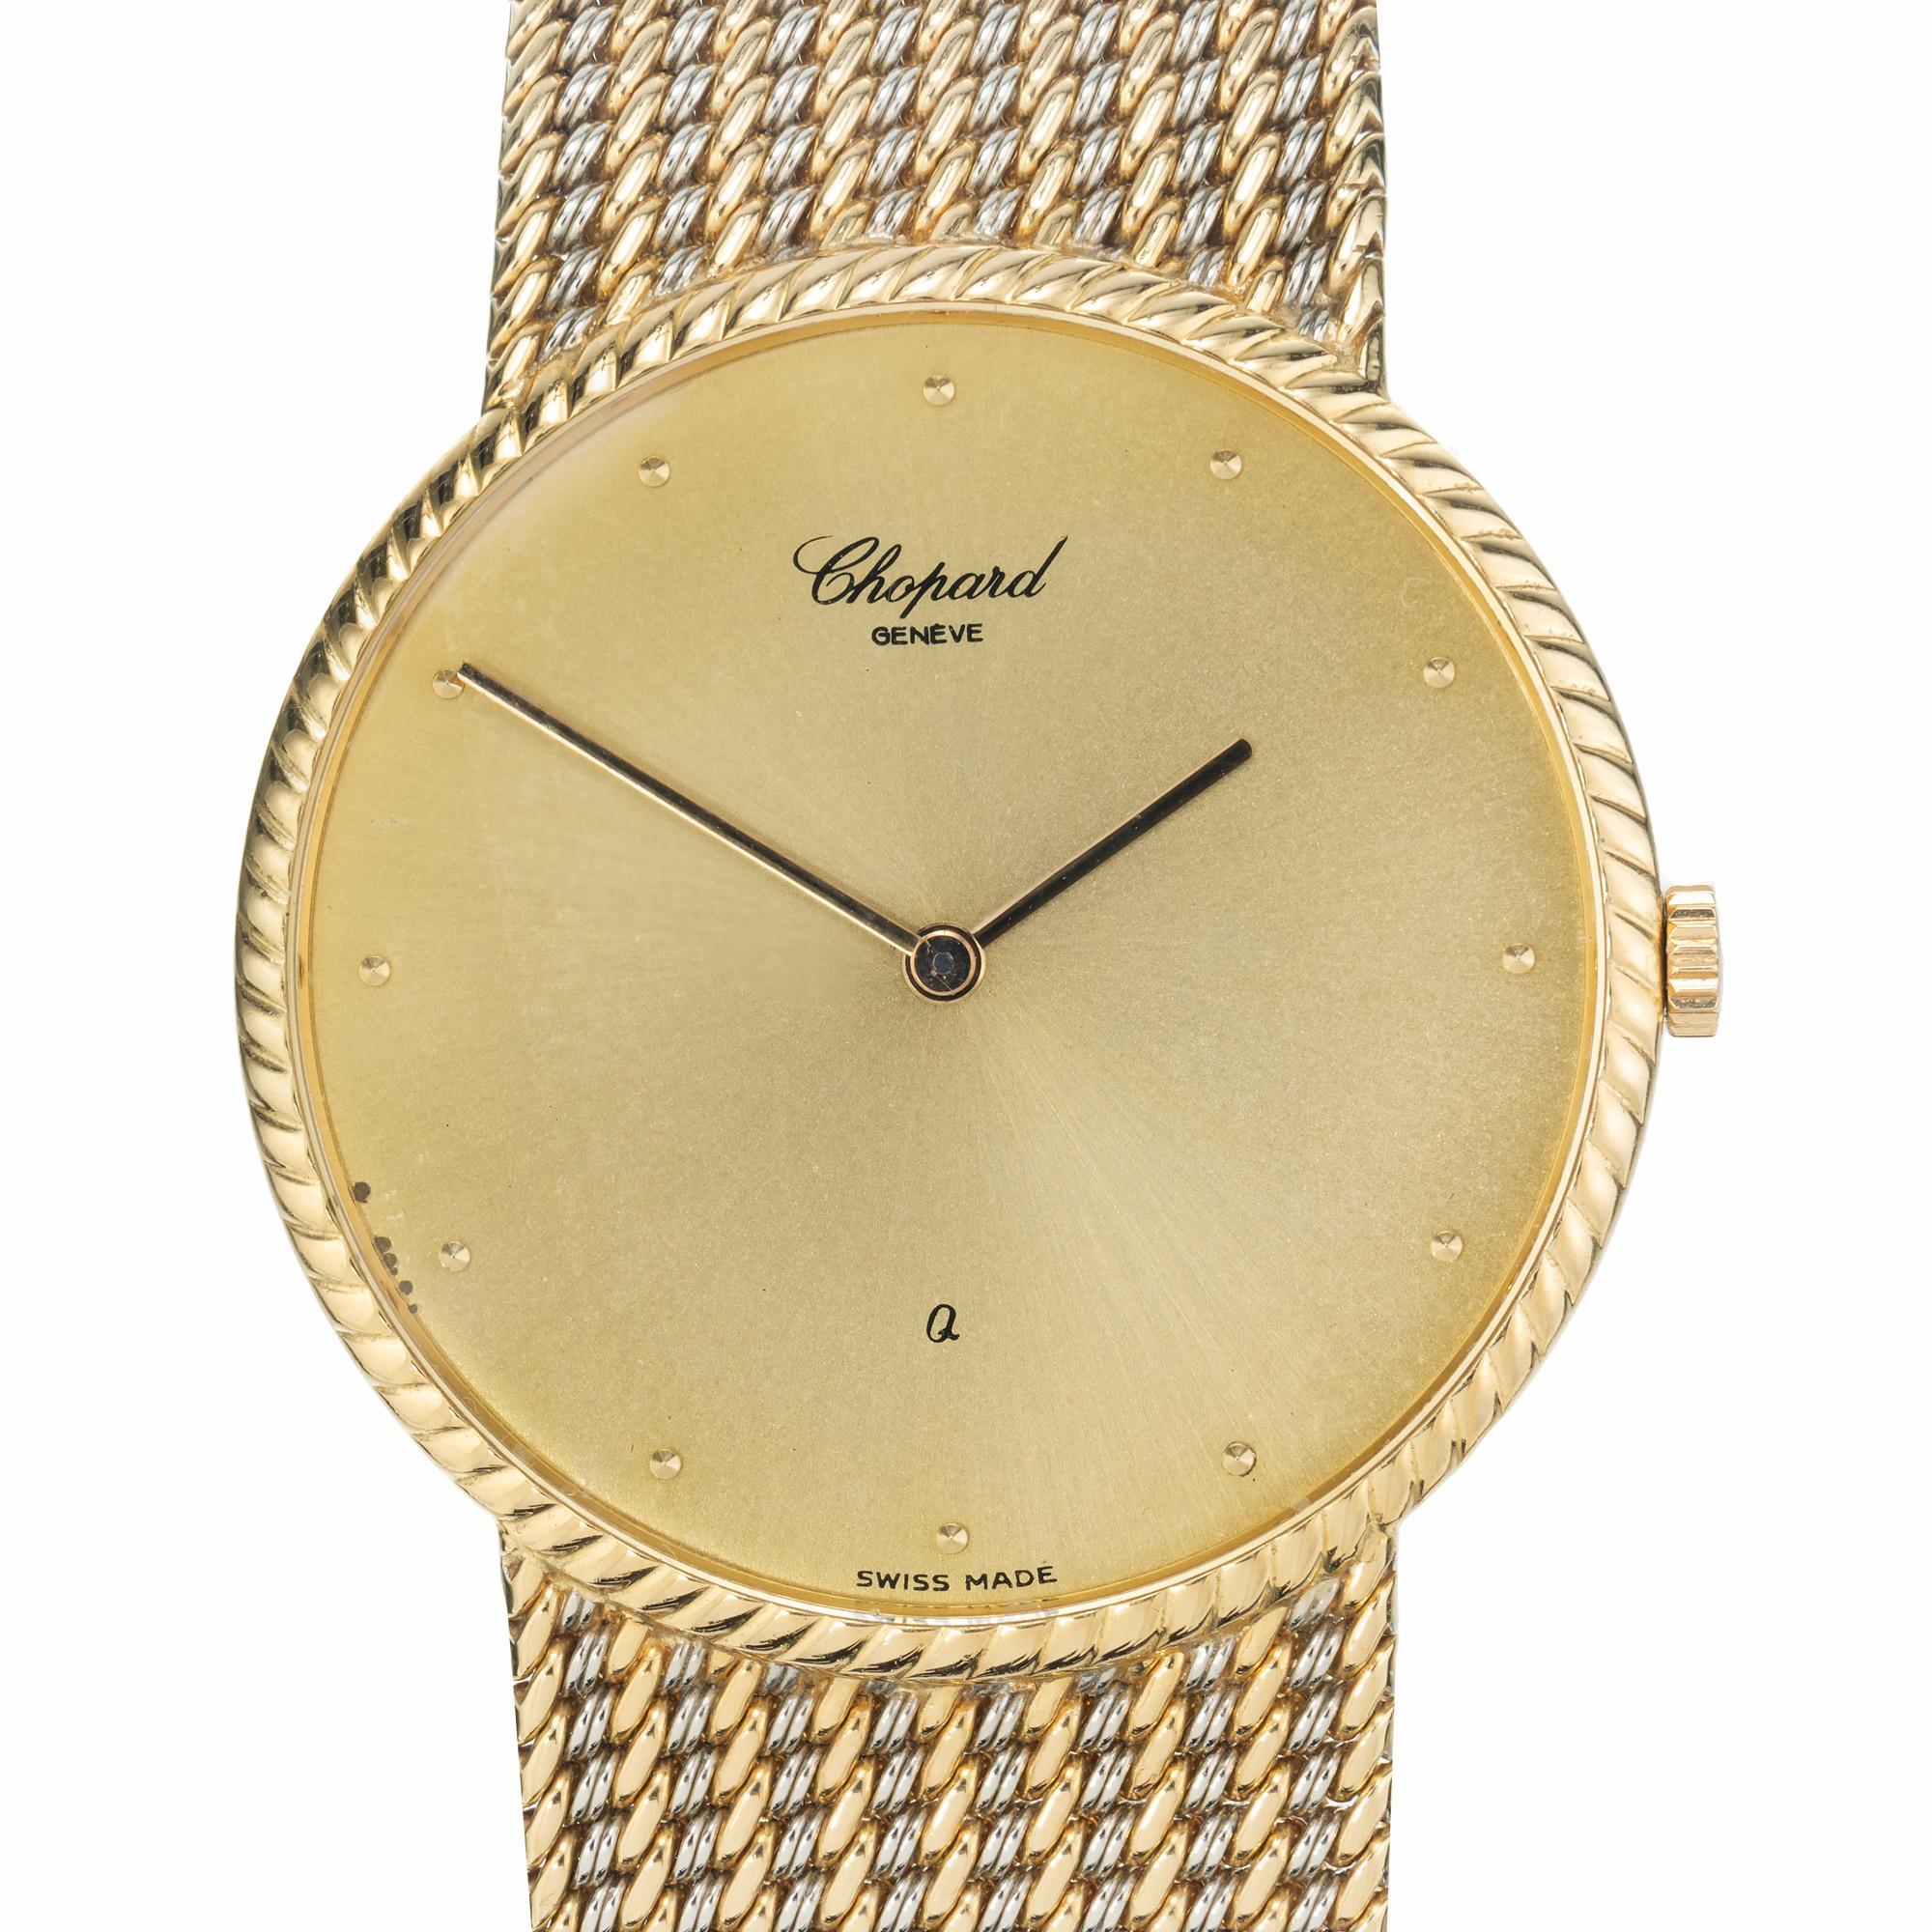 Chopard 18k yellow and white gold bracelet watch, circa 1980s. Chopard dress watch with a integral yellow and white gold woven mesh bracelet, quartz movement. 7.25 inches in length.

18k yellow and white gold
62.7 grams
Length: approx. 7 1/4